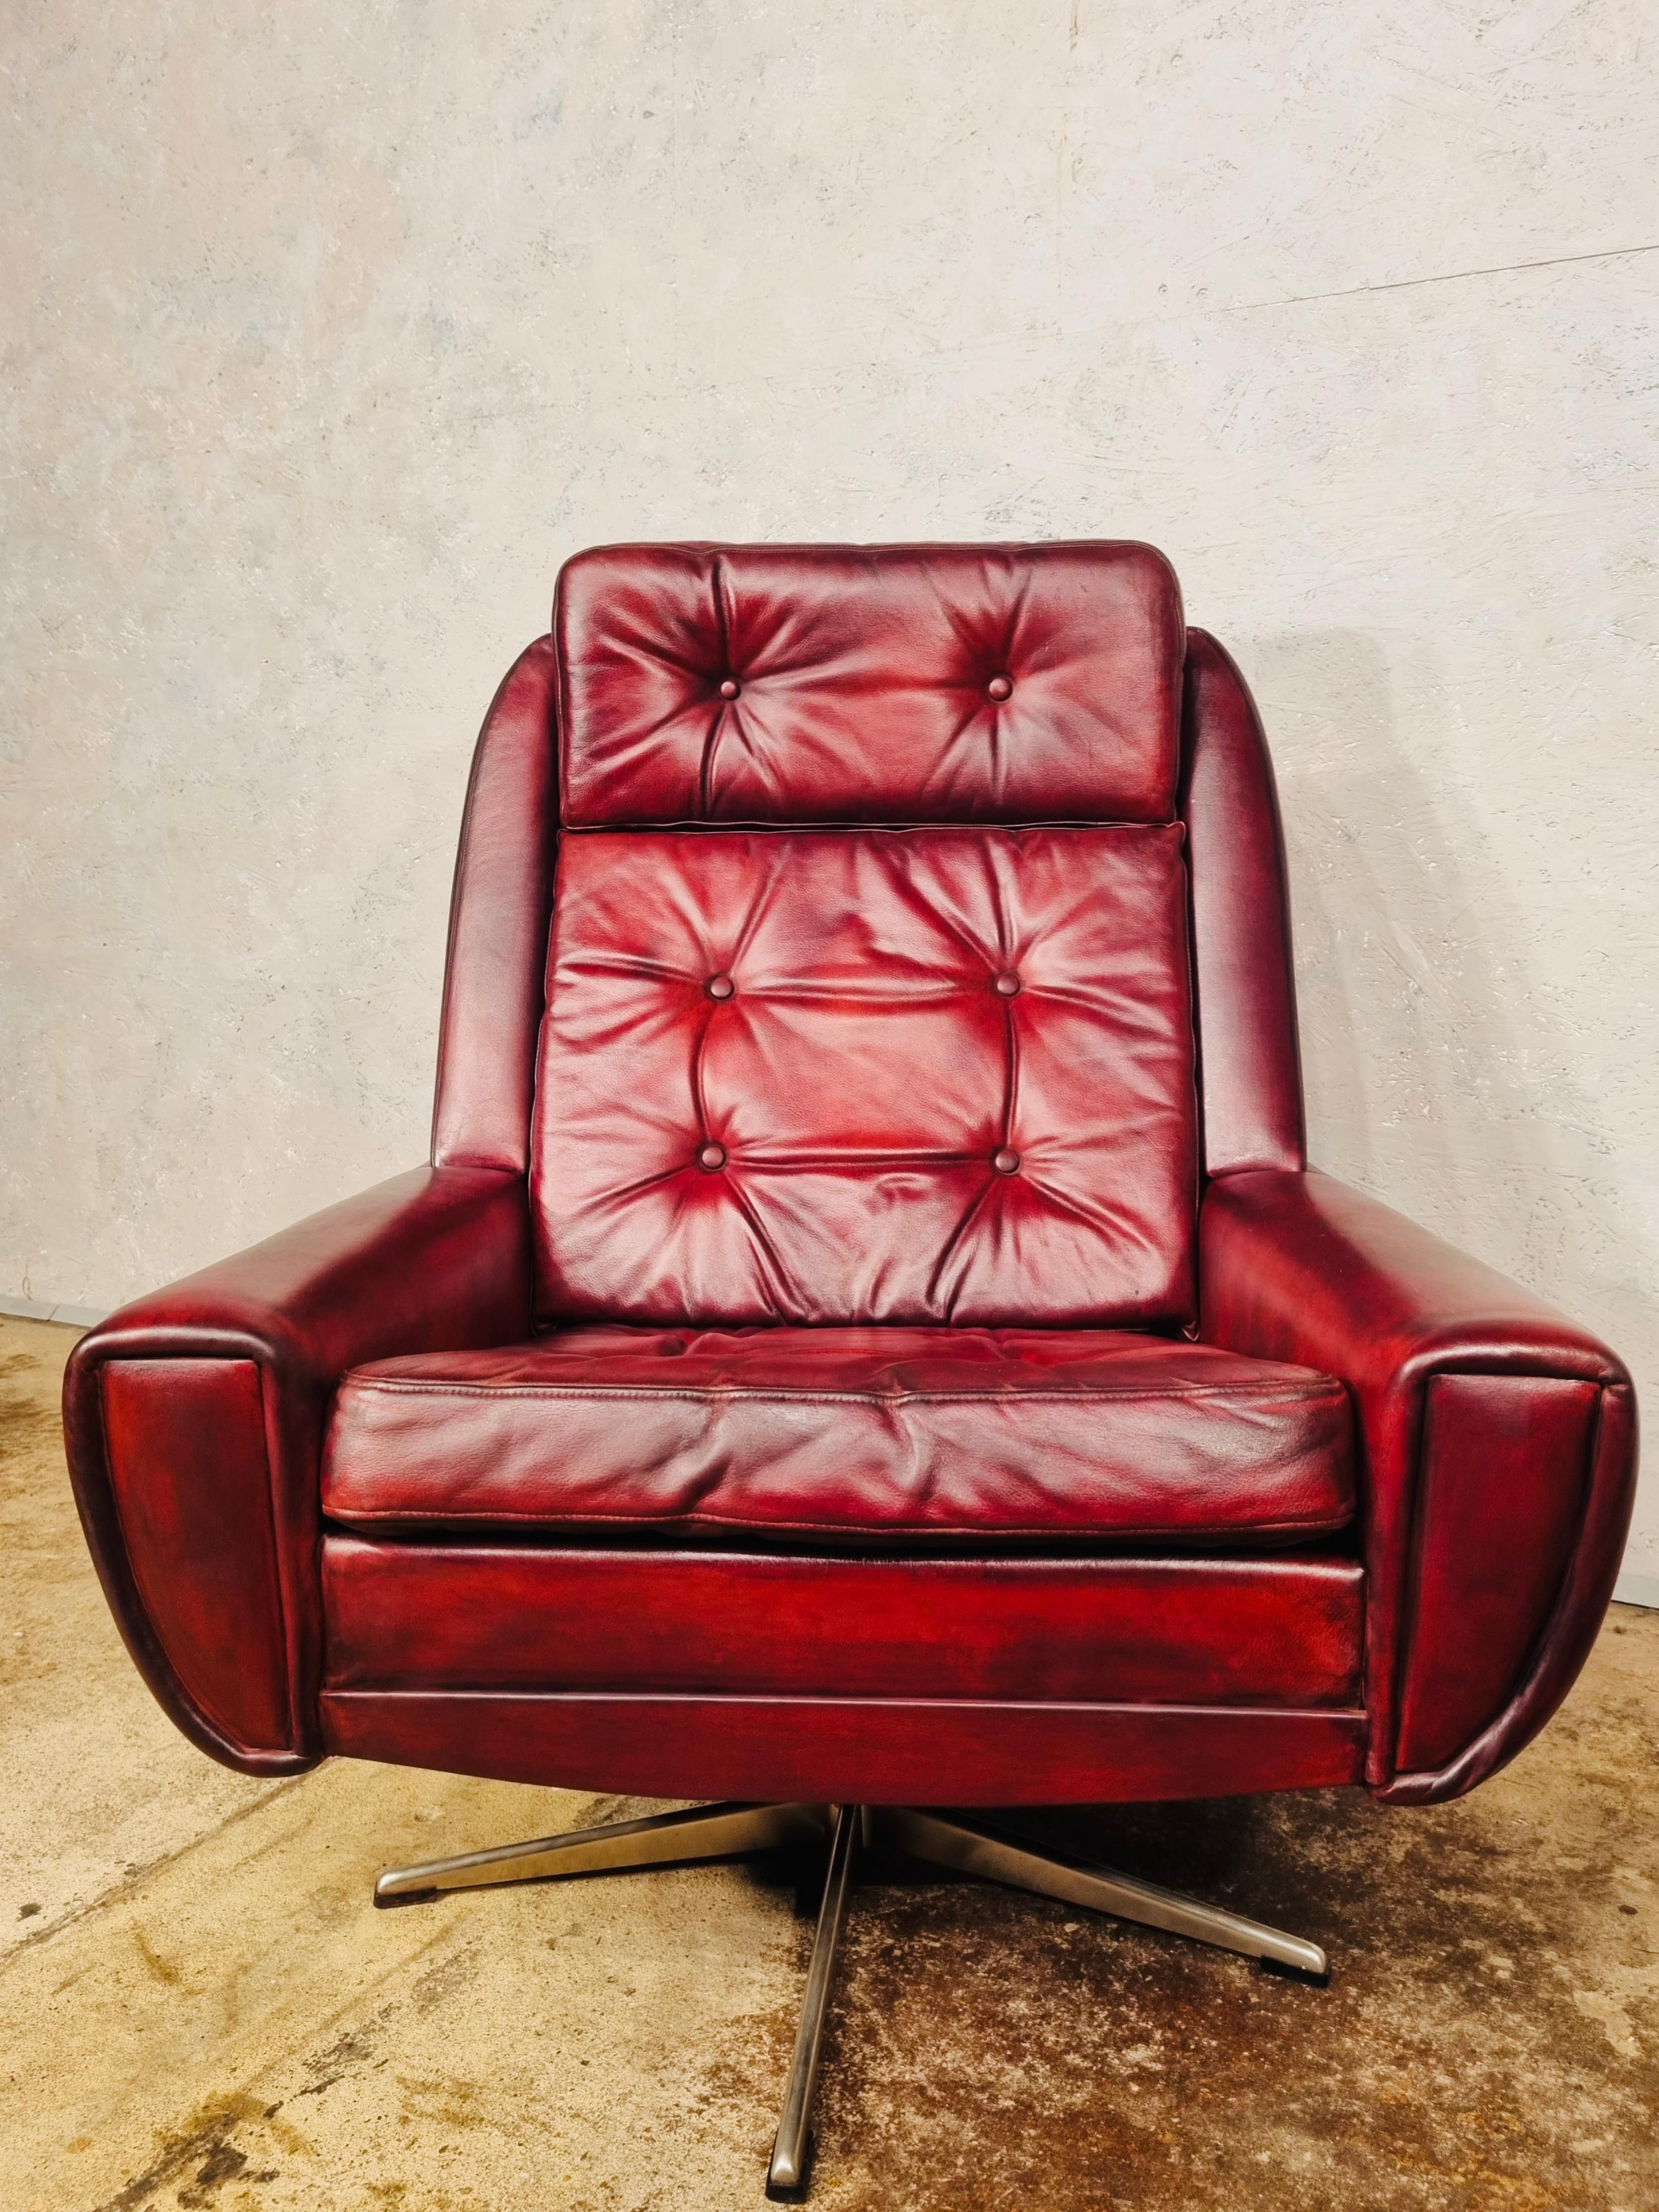 Superb Vintage 1970 Danish Leather Swivel Chair.

Great design, great lines and shape, very comfortable to sit in, beautiful patinated deep red hand dyed, the leather has a great patina and finish.

Viewings welcome at our showroom in Lewes, East